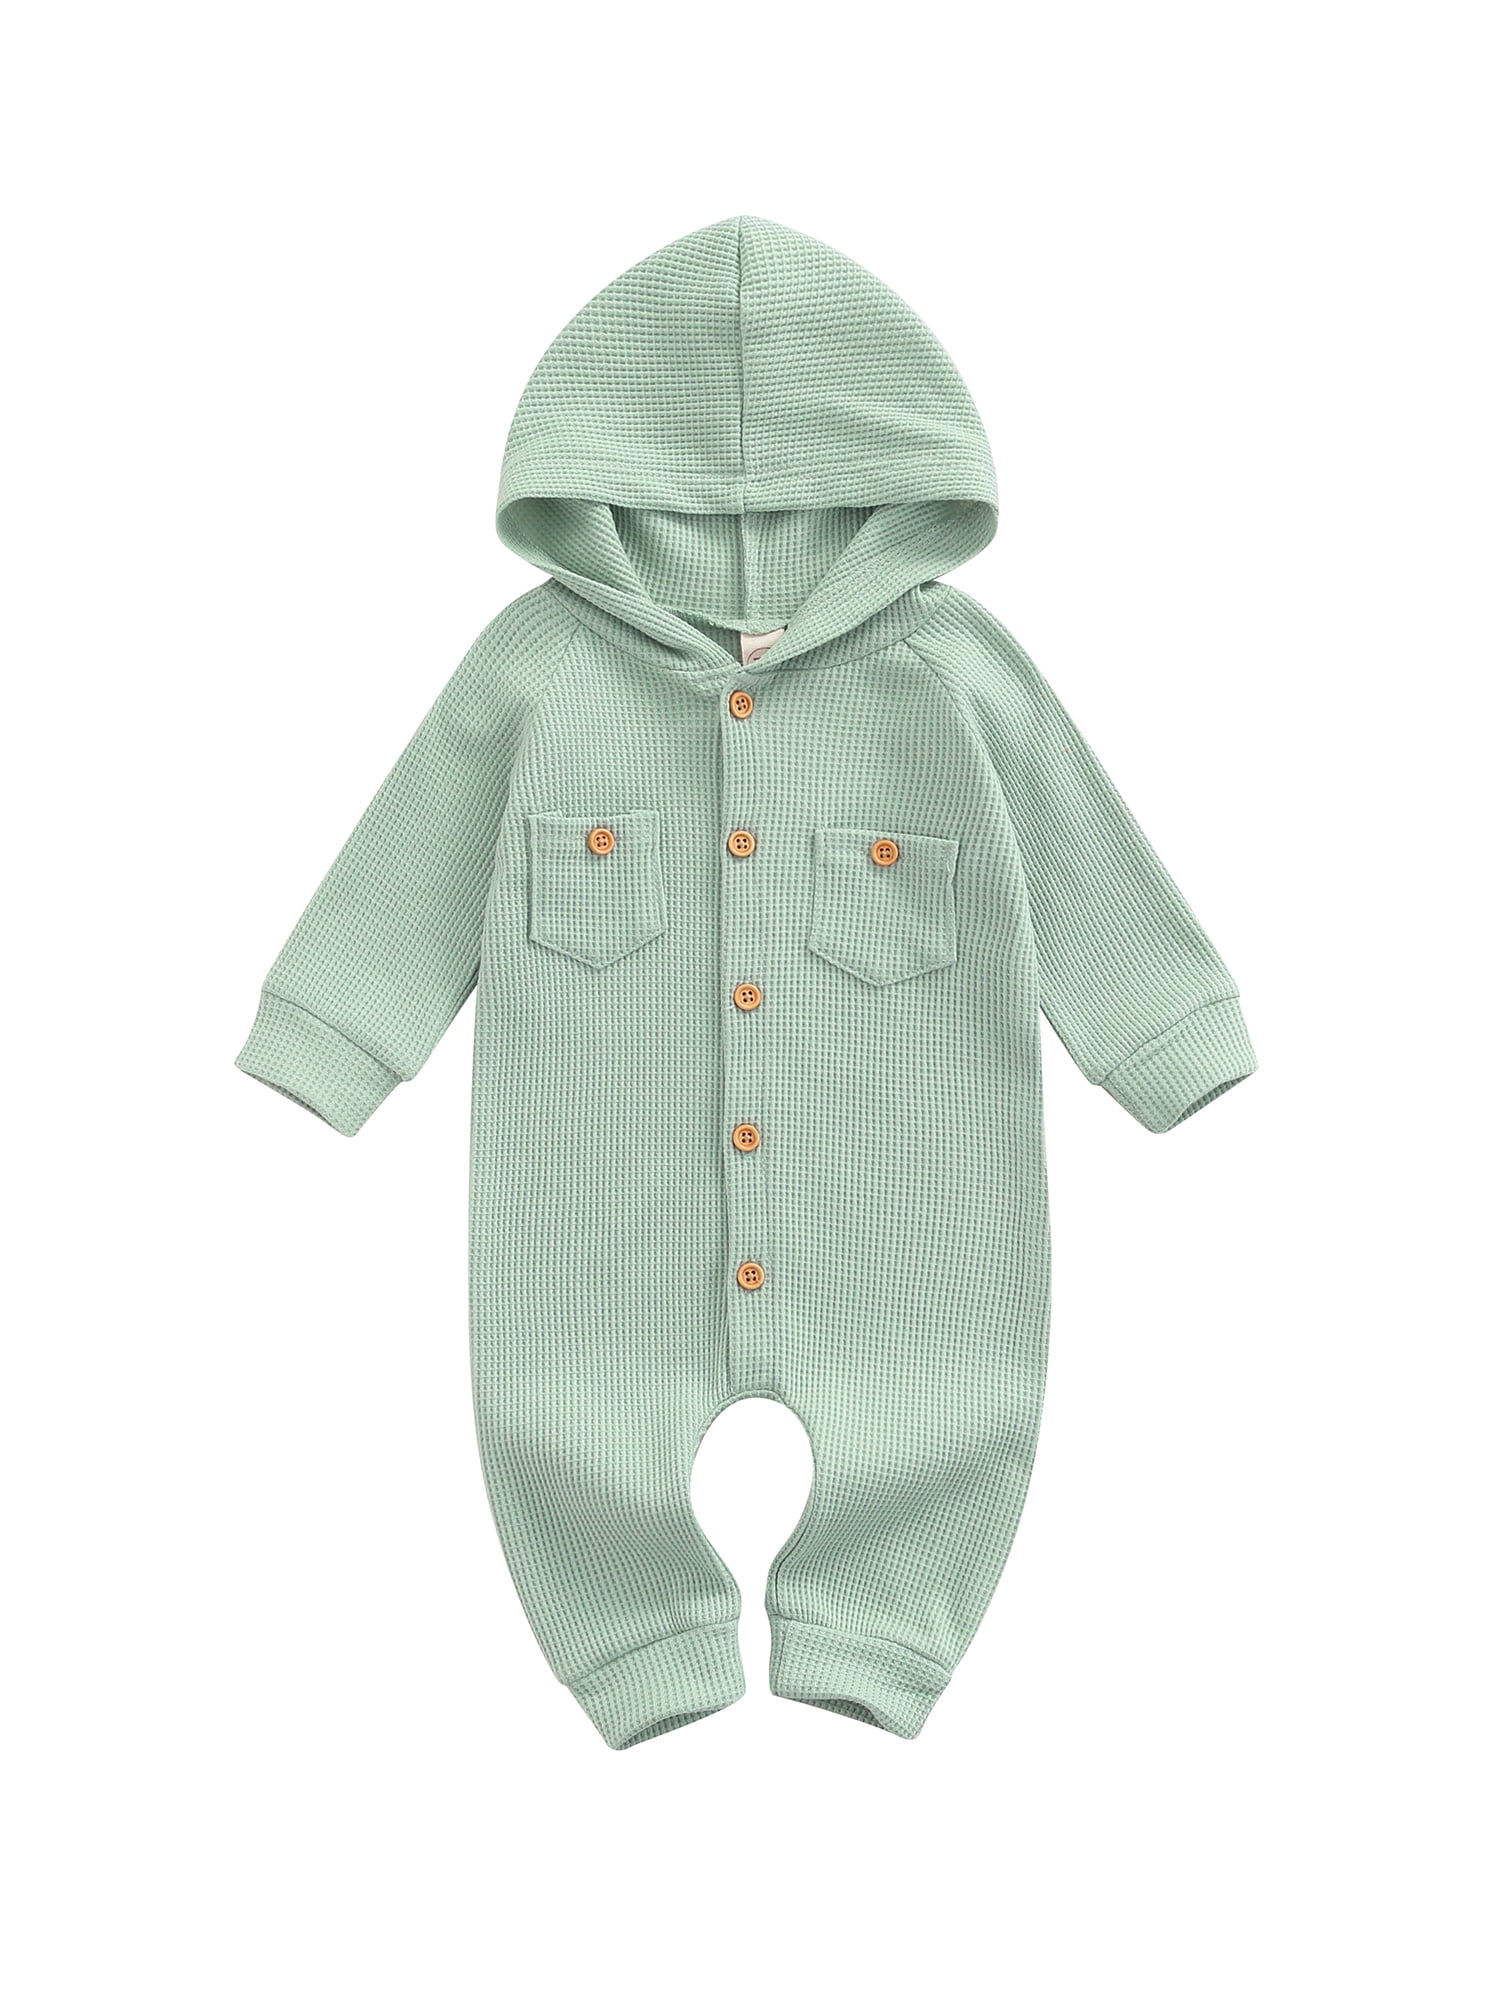 Winter Newborn Baby Boy Girl Solid Romper Unisex Infants Hooded Outfit Clothes Waffle Cotton Button Jumpsuits 